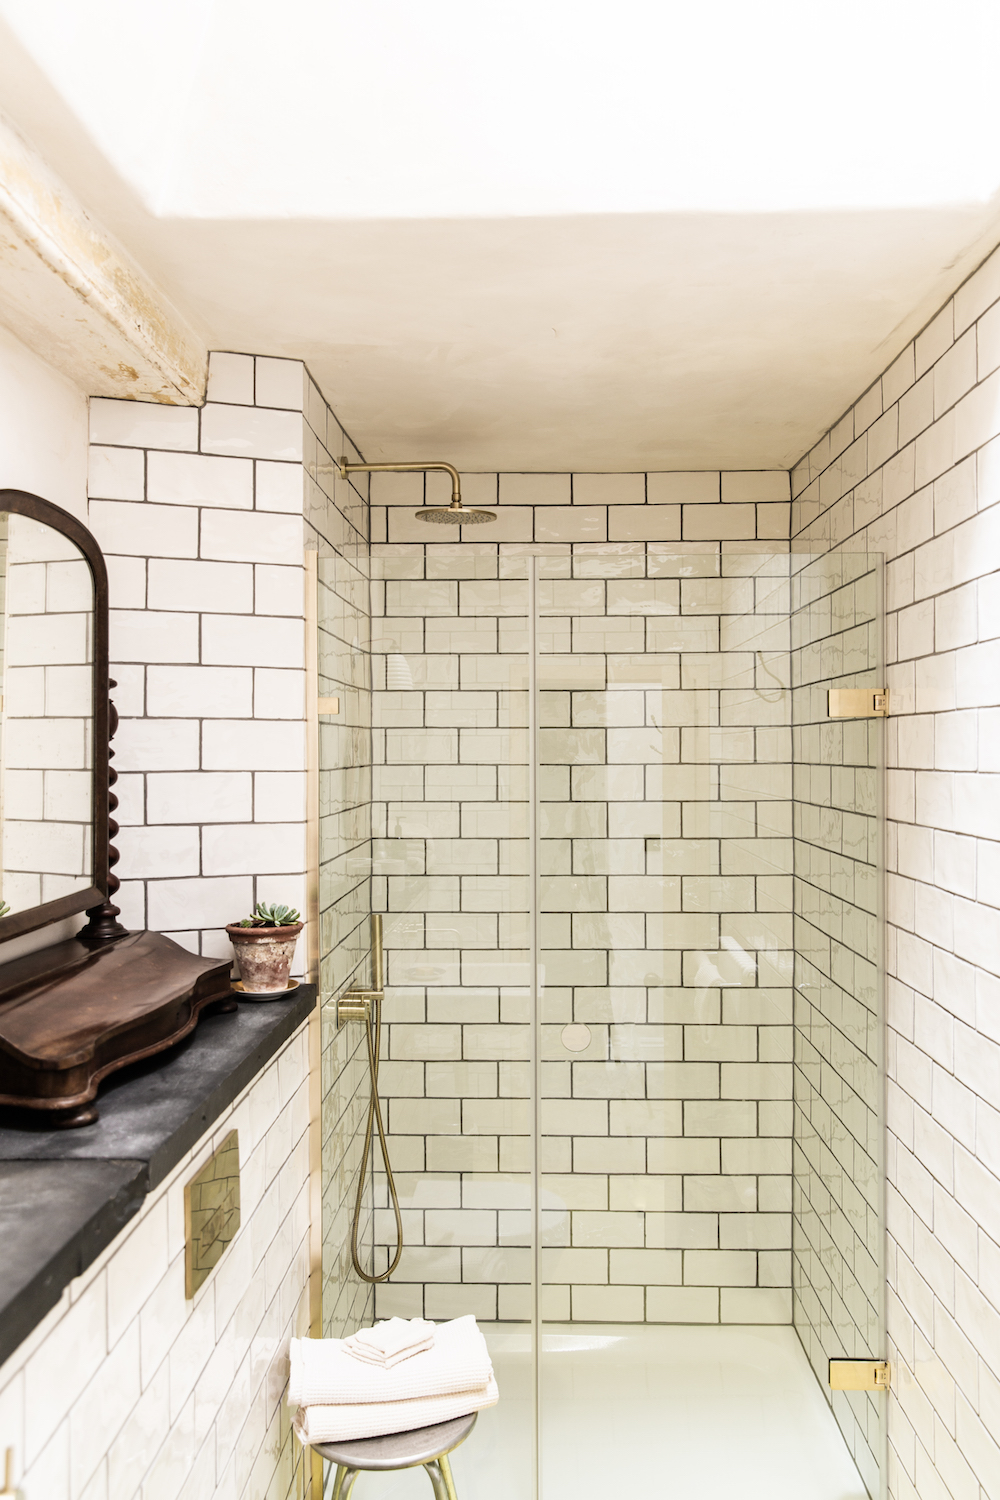 A white brick tiled bathroom with gold shower